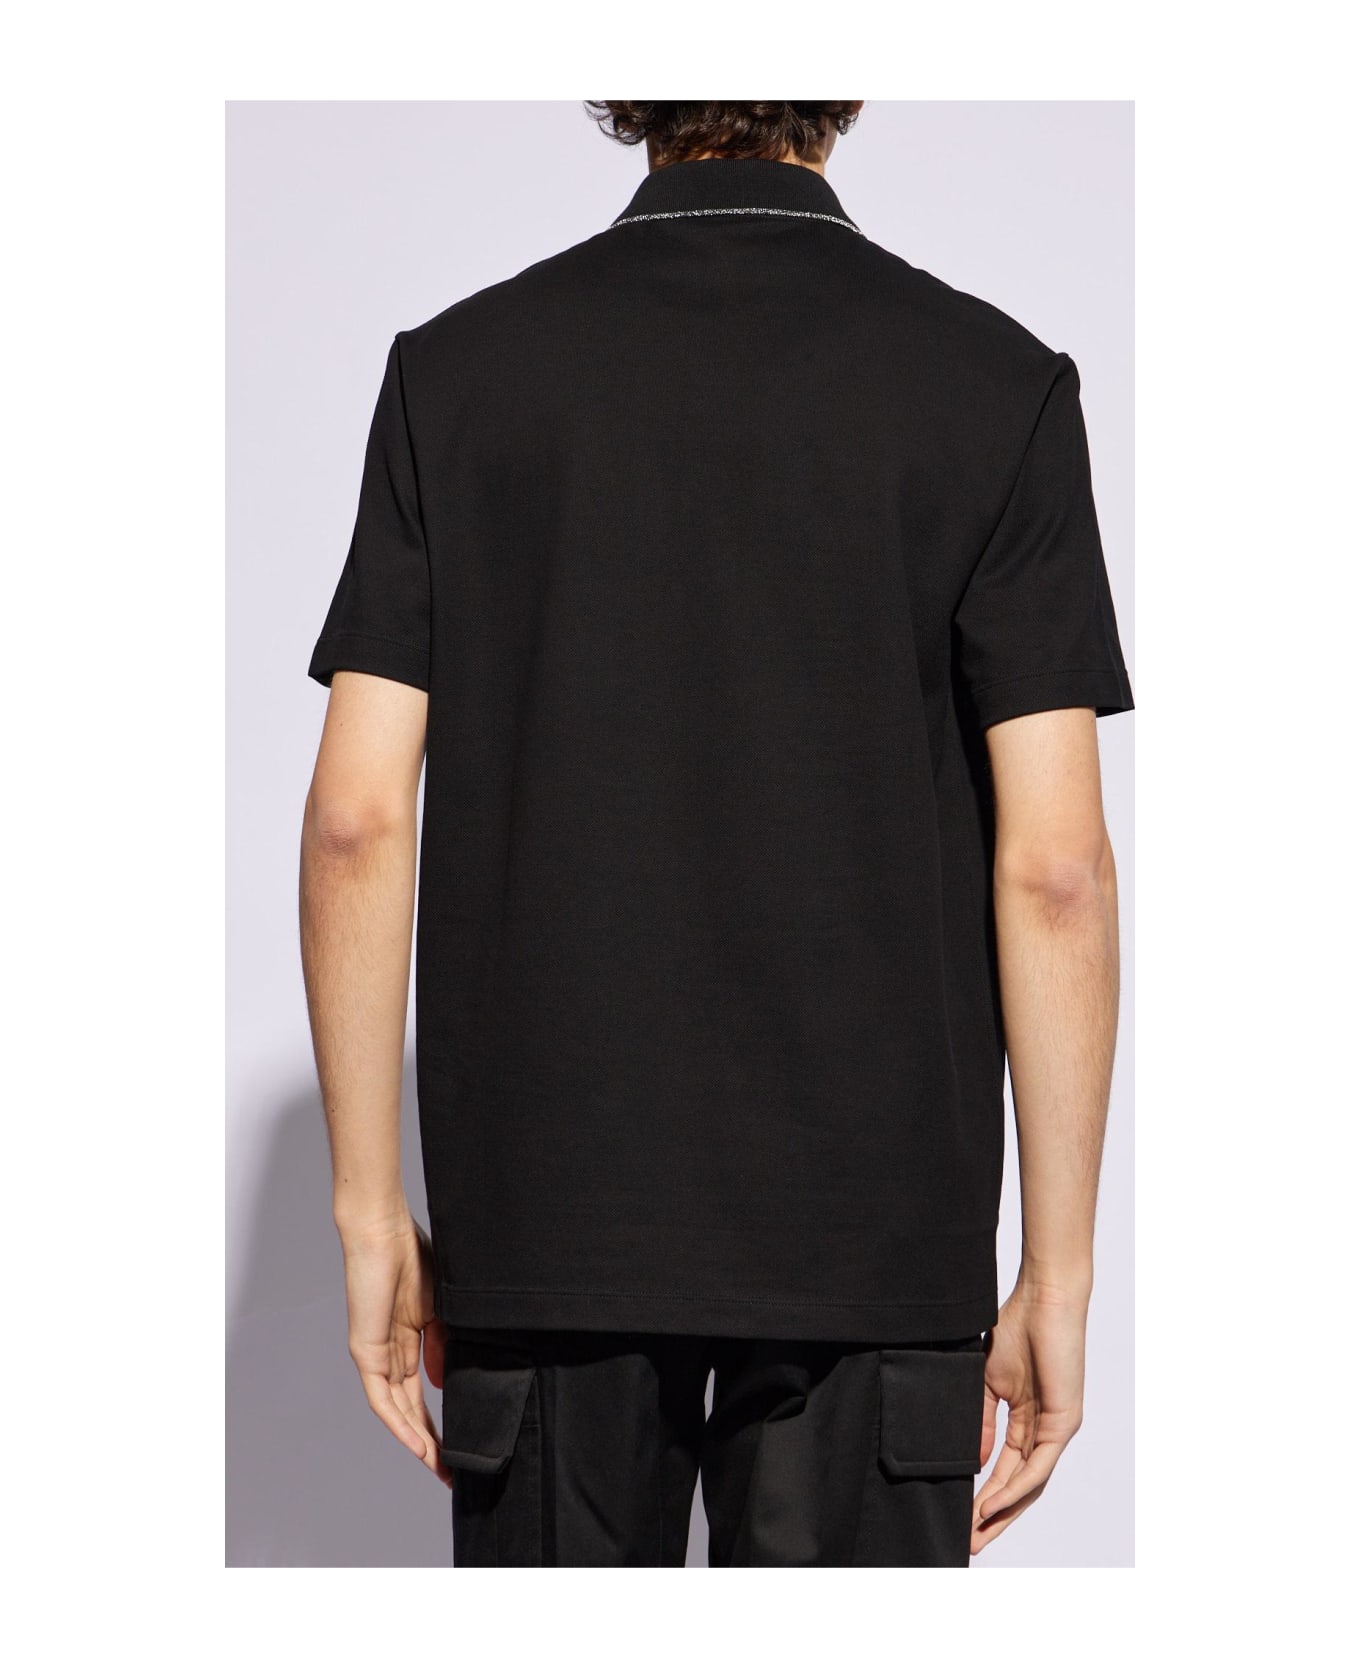 Versace Embroidered Polo Shirt - BLACK シャツ